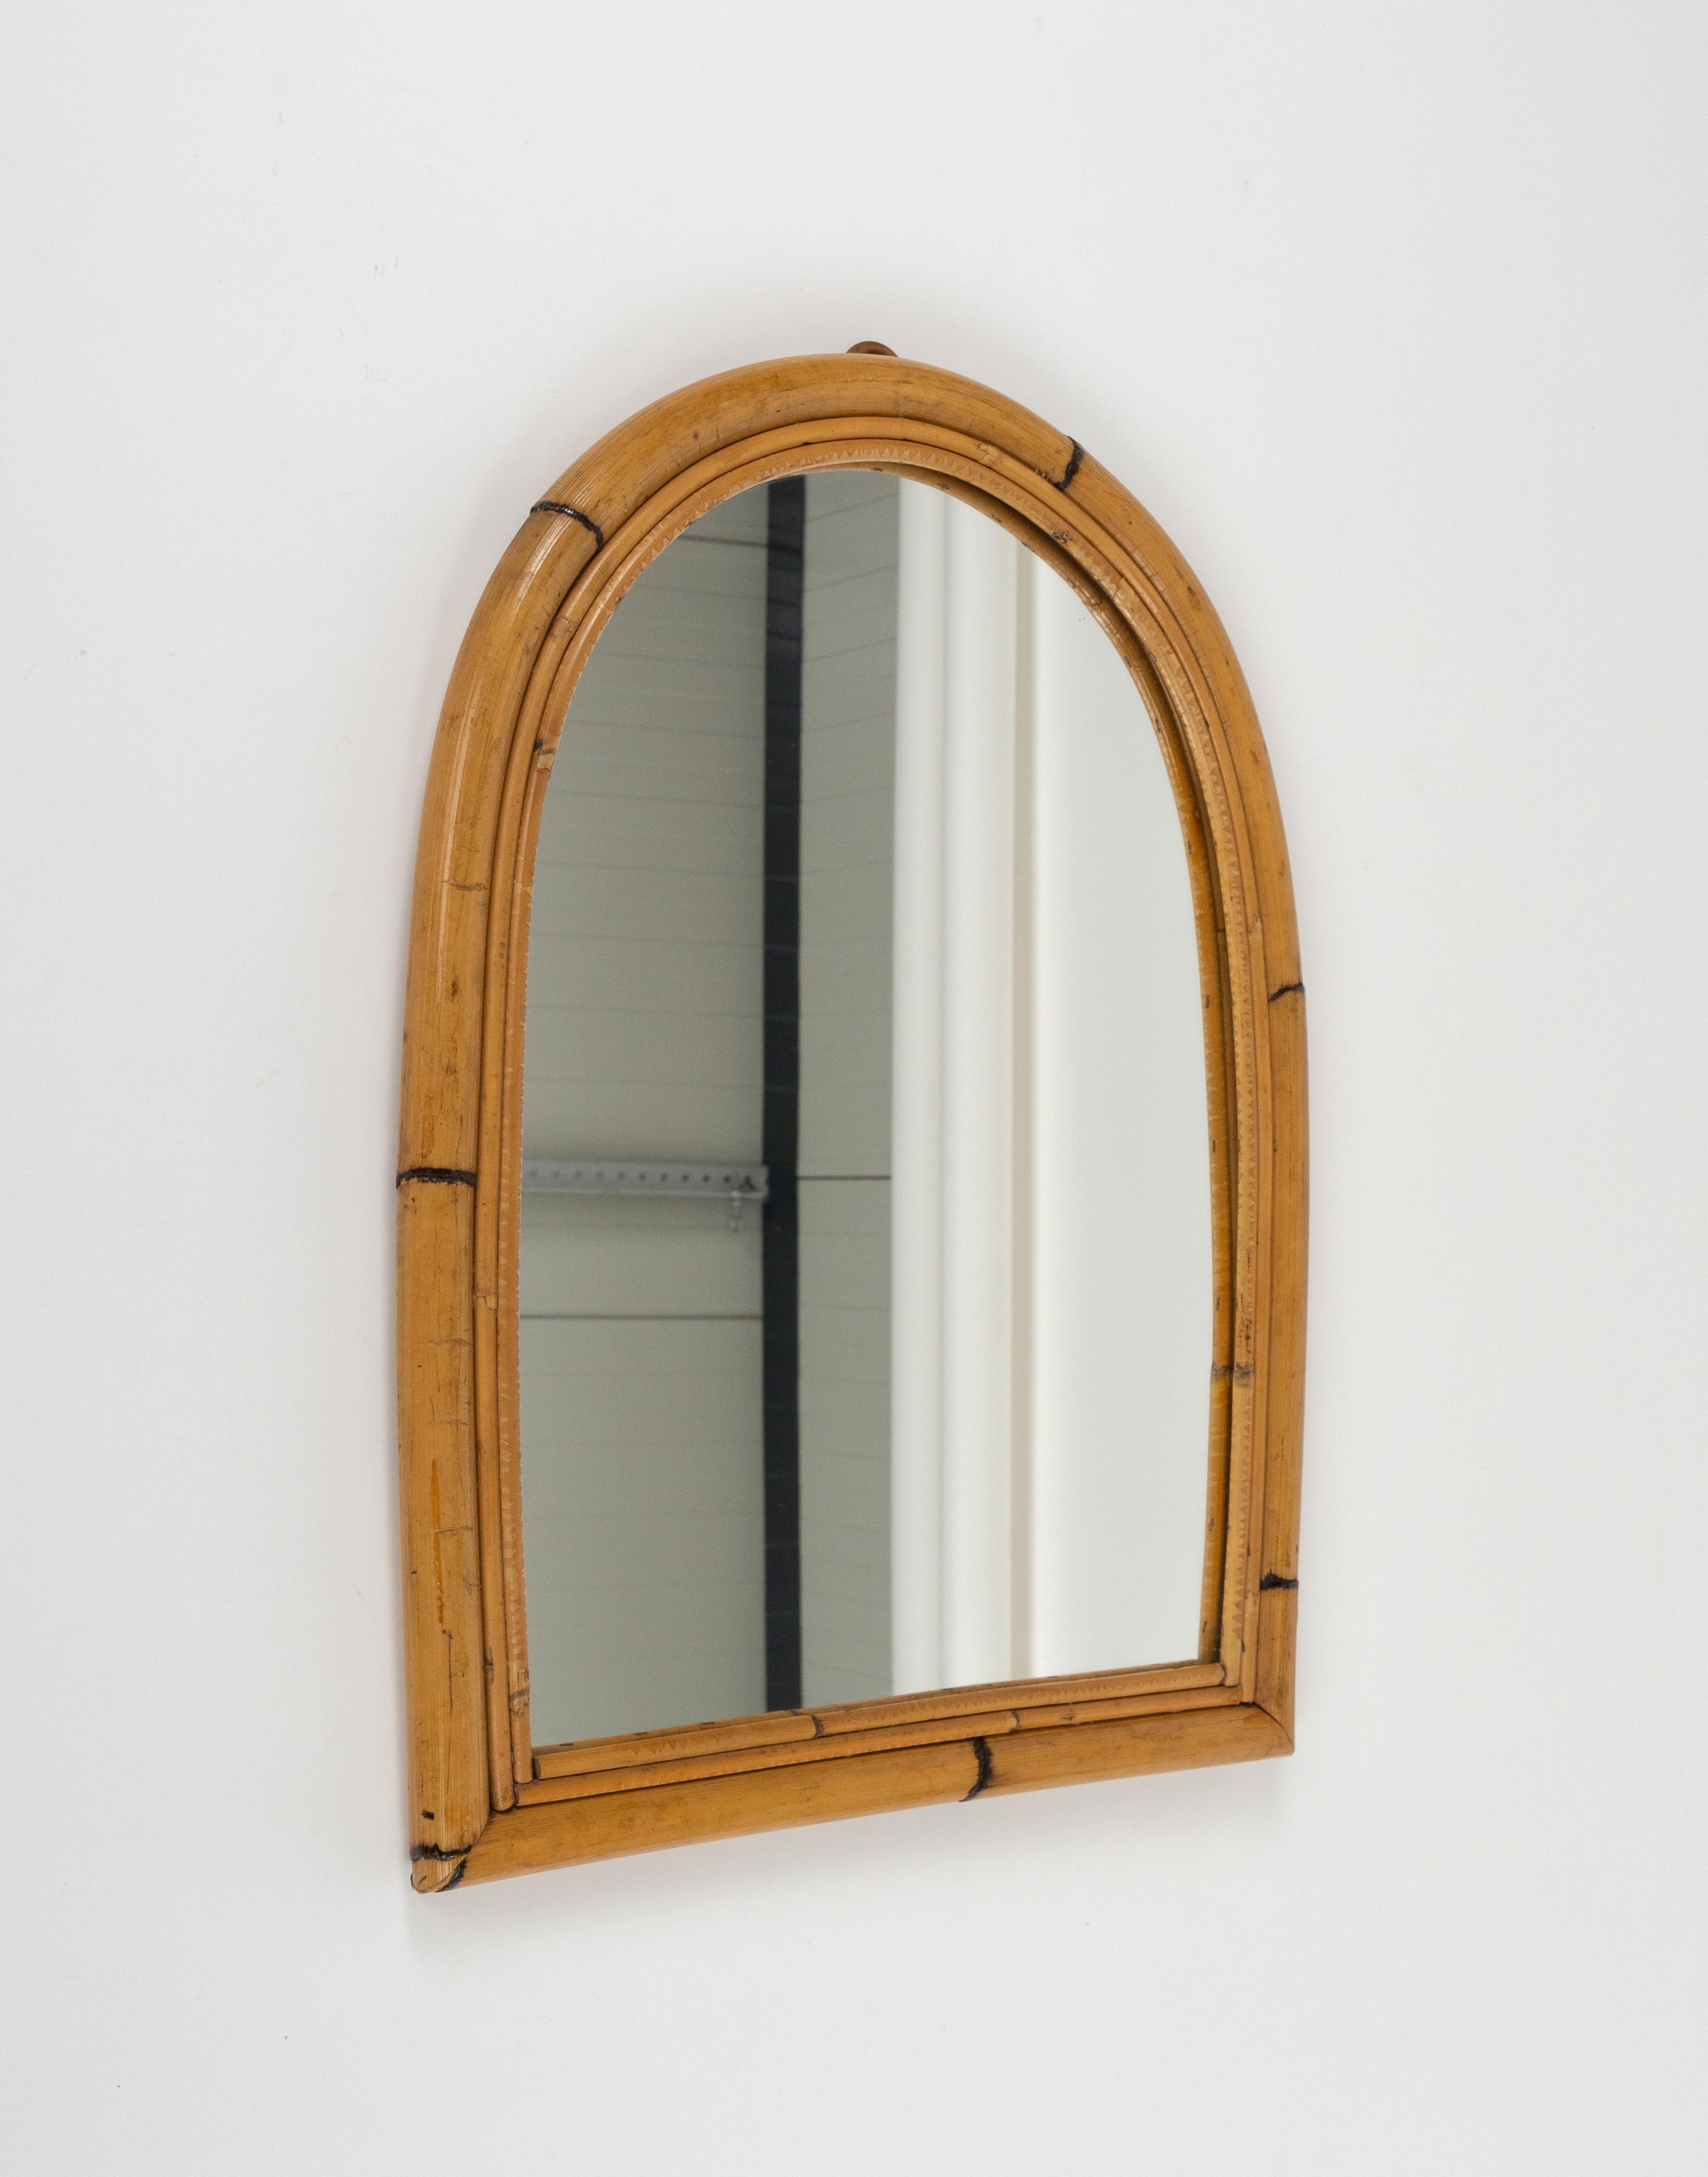 Italian Midcentury Rattan and Bamboo Arched Wall Mirror, Italy 1960s For Sale